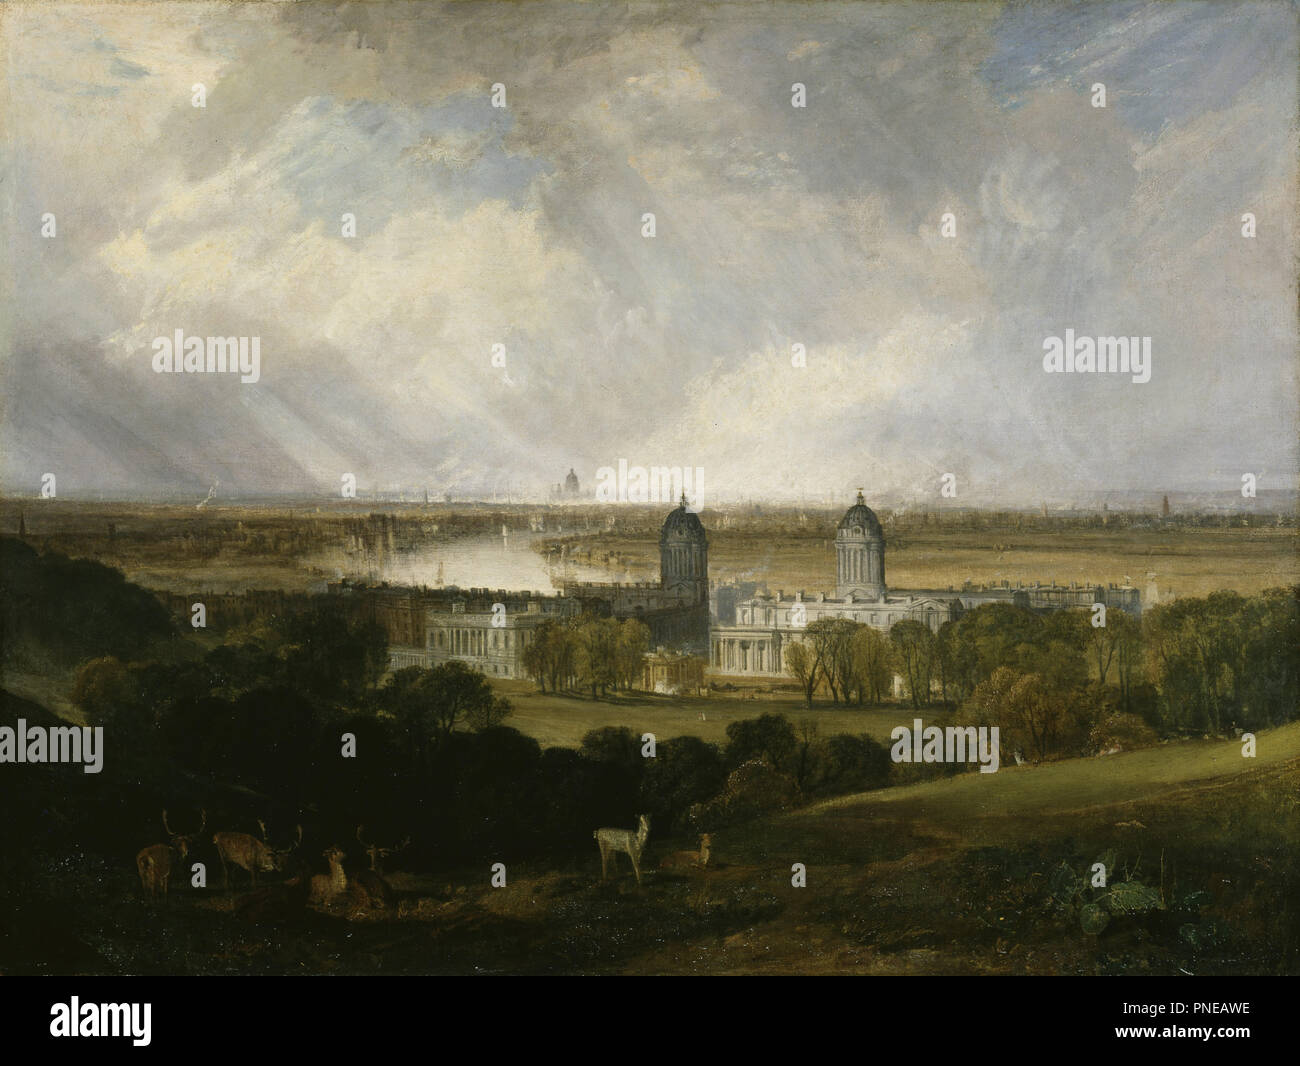 London from Greenwich Park. Date/Period: 1809. Painting. Oil on canvas. Height: 902 cm (29.5 ft); Width: 120 cm (47.2 in). Author: J. M. W. Turner. William Turner. TURNER, JOSEPH MALLORD WILLIAM. Stock Photo